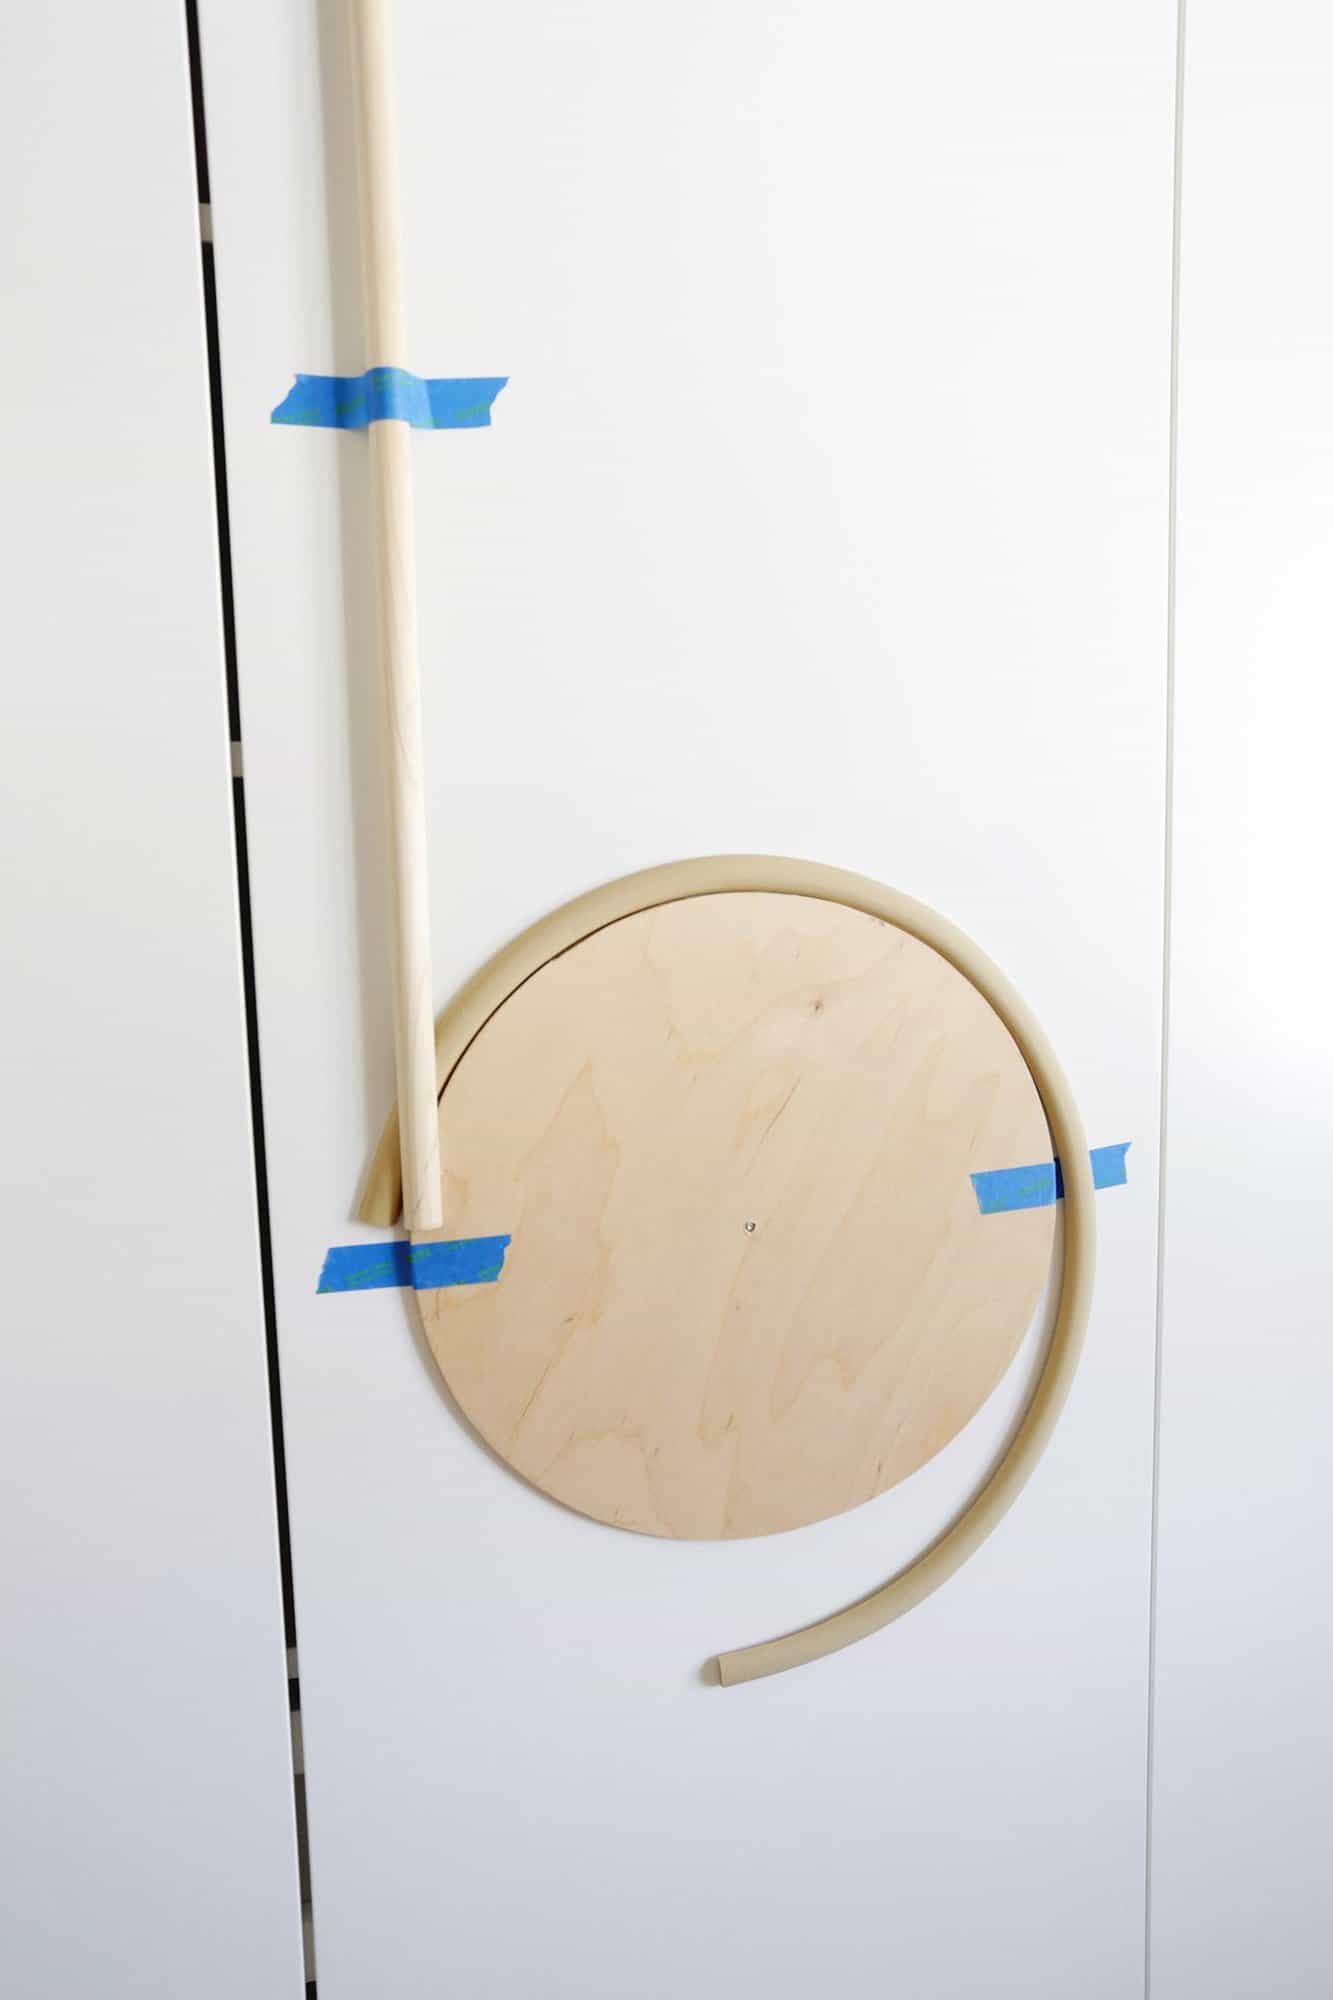 wooden circle guide with flexible trim draped over it